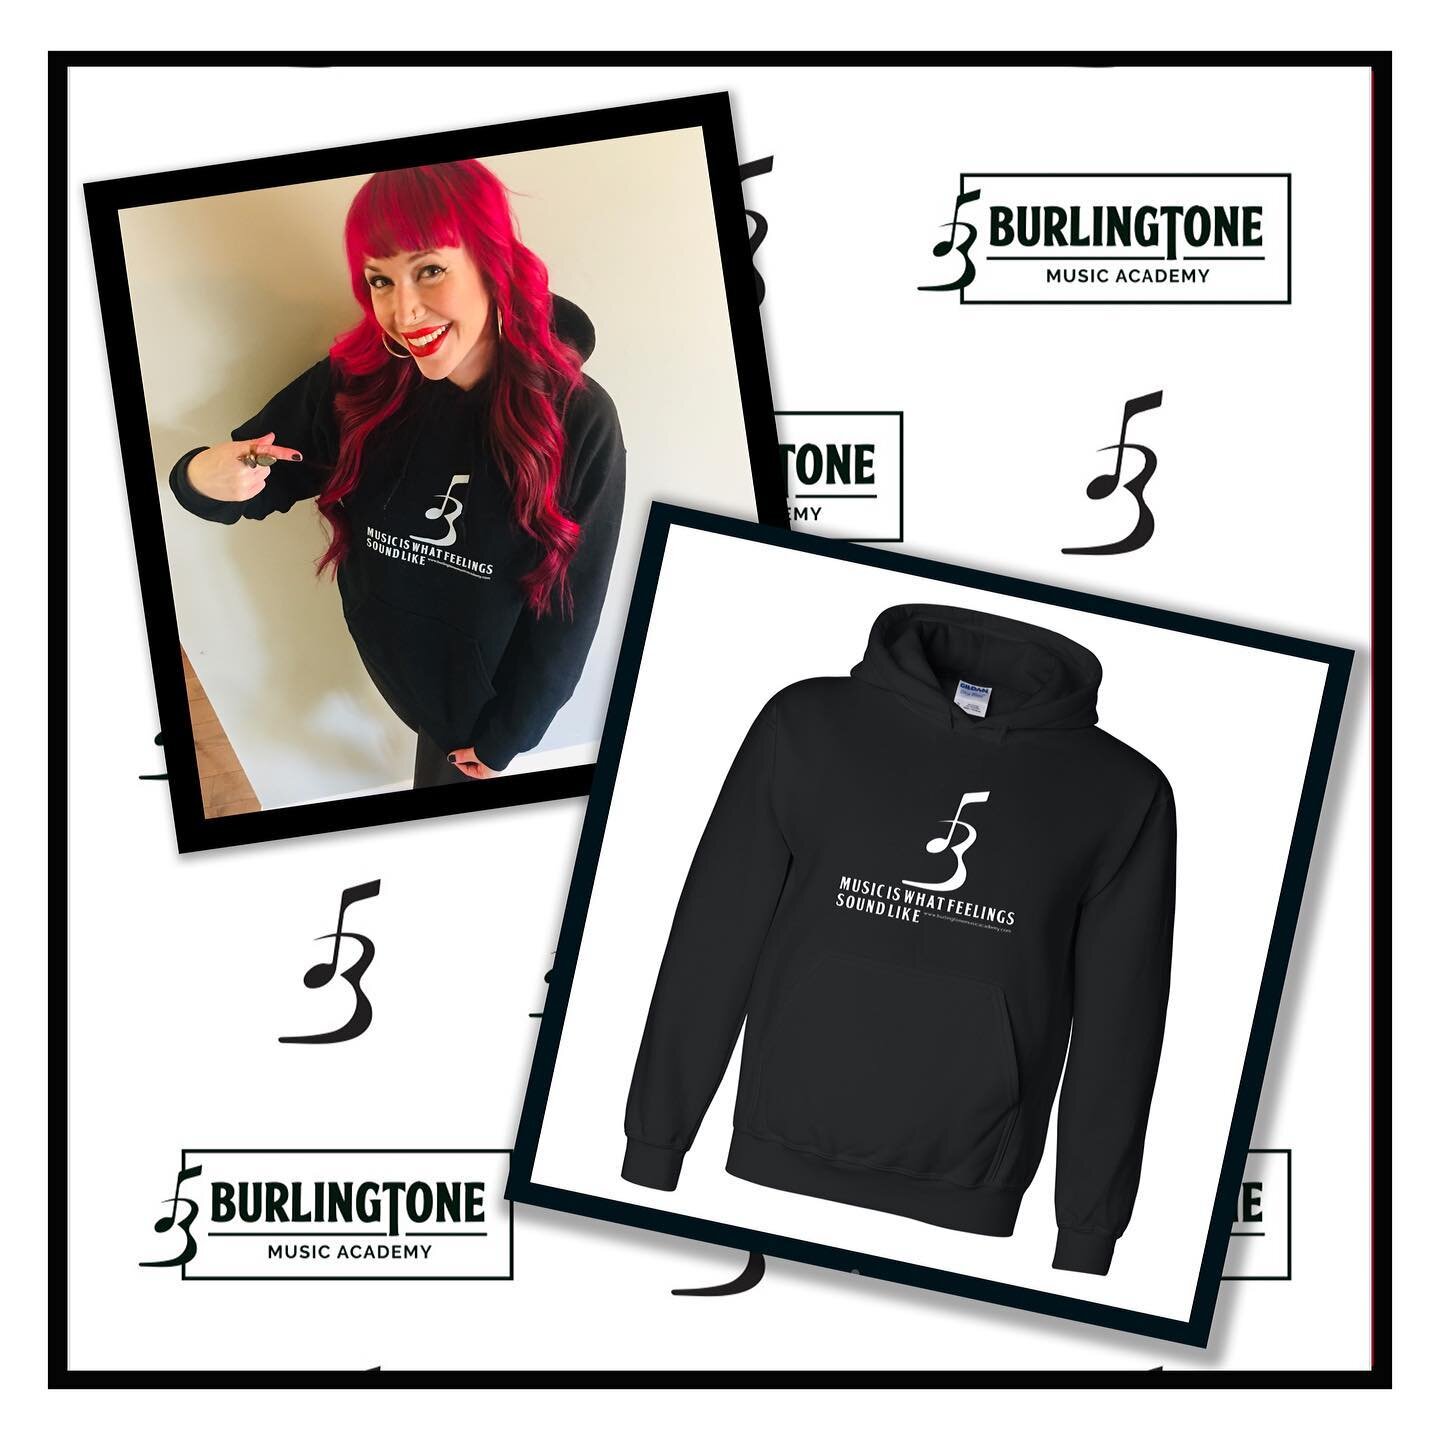 &ldquo;Music Is What Feelings Sound Like&rdquo; 🎵🎶🎵

Show the world your love for music with your very own #BurlingToneMusicAcademy hoodie!
$75.00 + shipping 
Email your order to: burlingtonemusic@gmail.com or DM us! Spread the word!! Spread the l